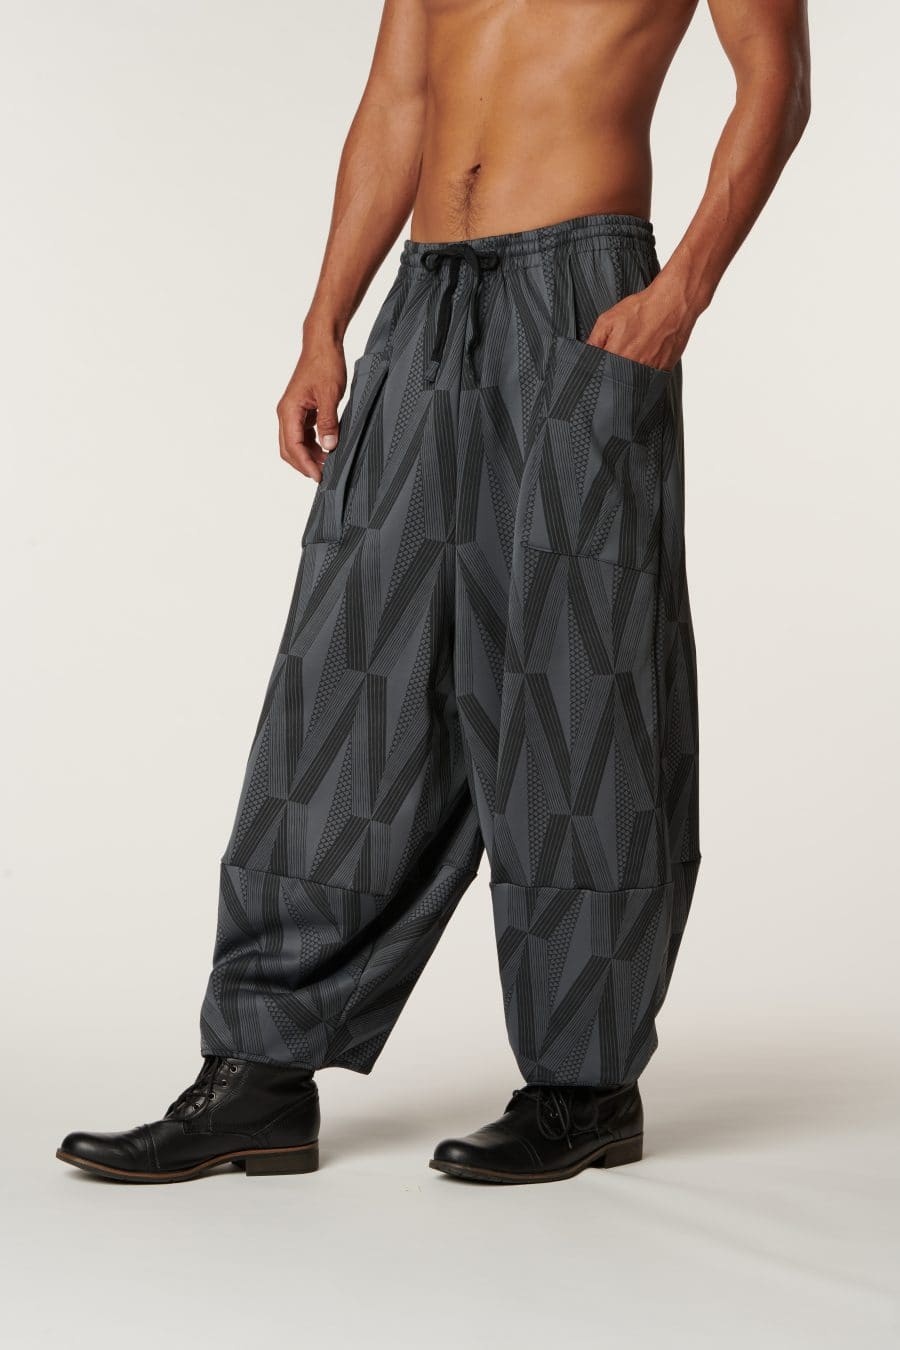 Male model wearing Waiola Pant in a Kanaola Print and Grey/Black Color - Front View